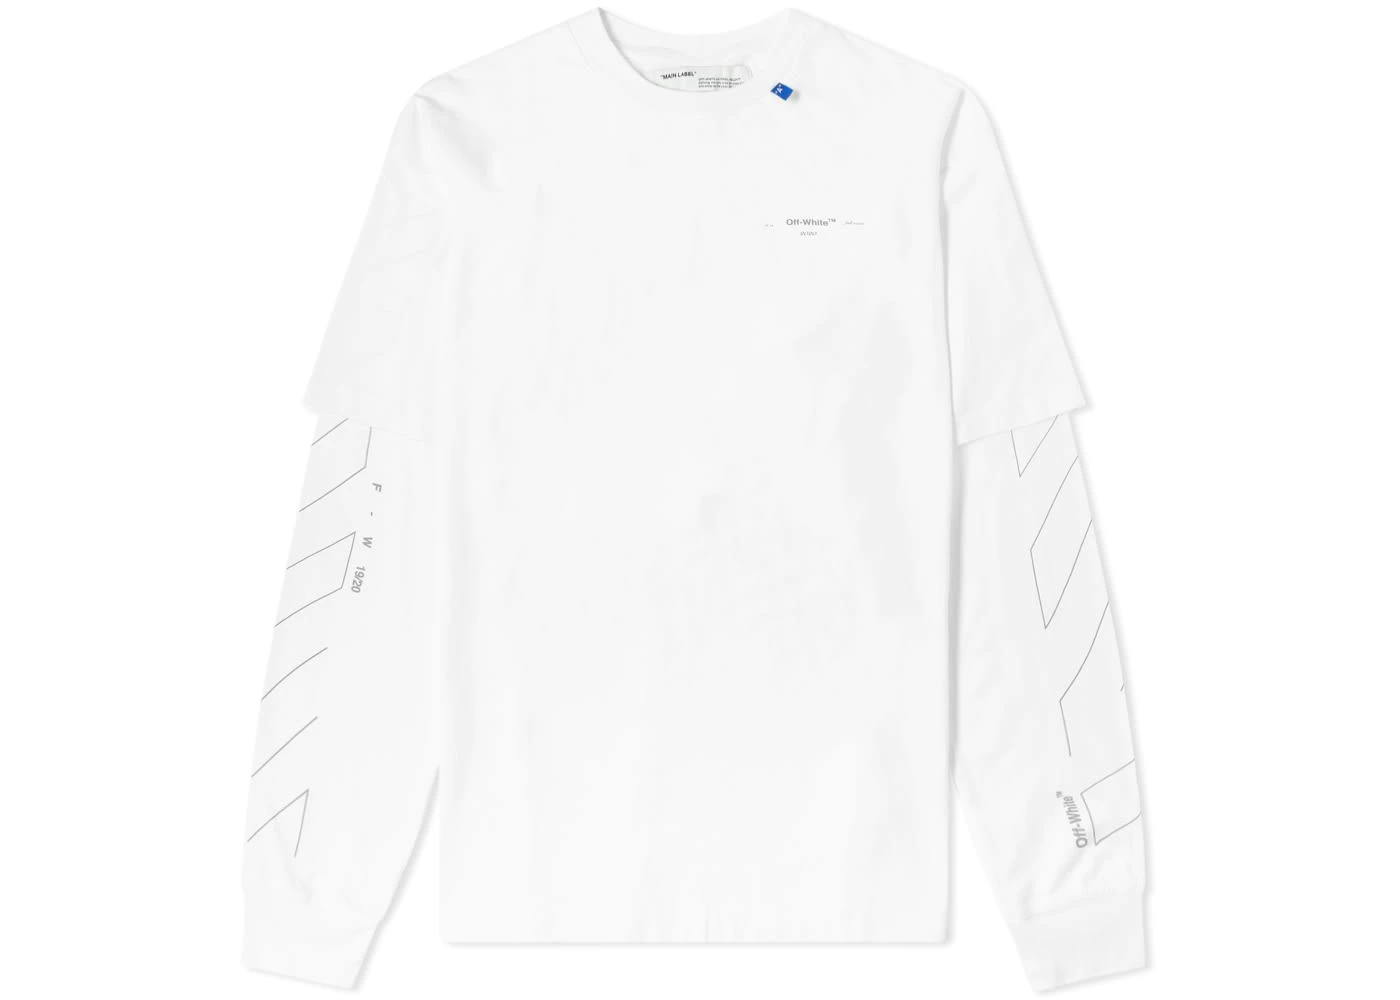 OFF-WHITE Diag Unfinished T-Shirt White/Silver - FW19 Men's - US